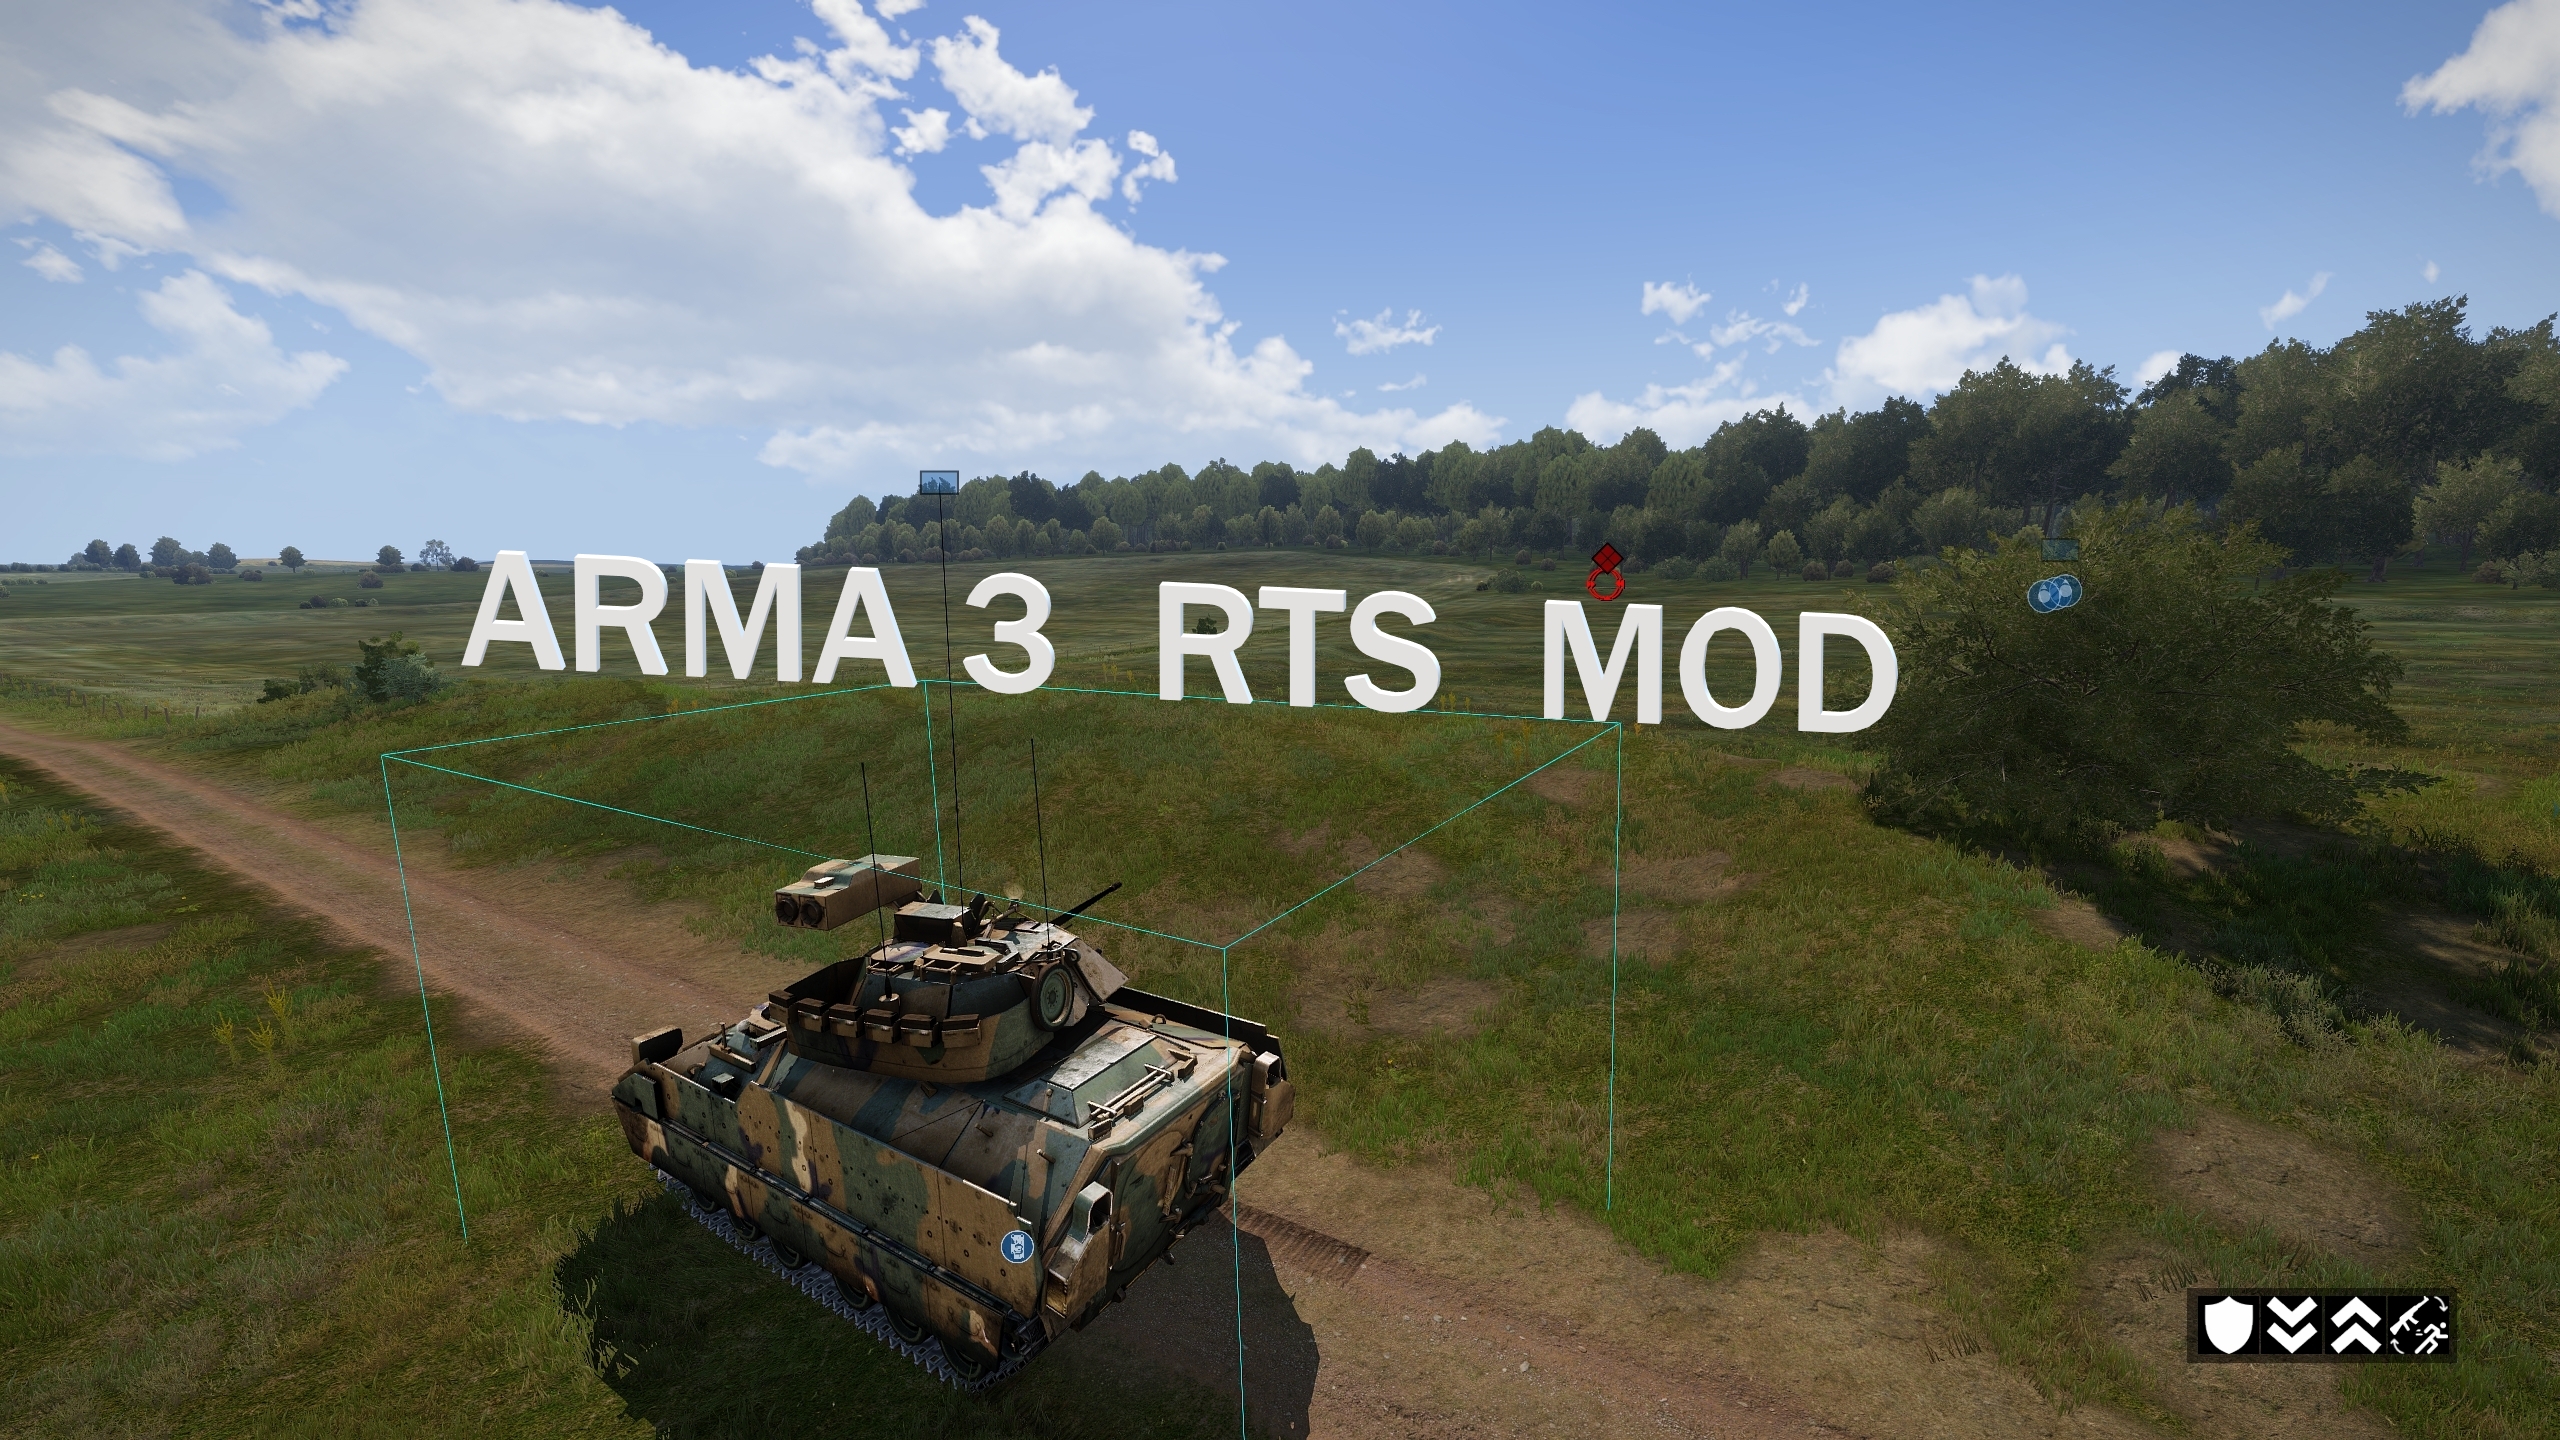 Arma Platform on X: 📻 Dear Community, The #ArmaReforger has been